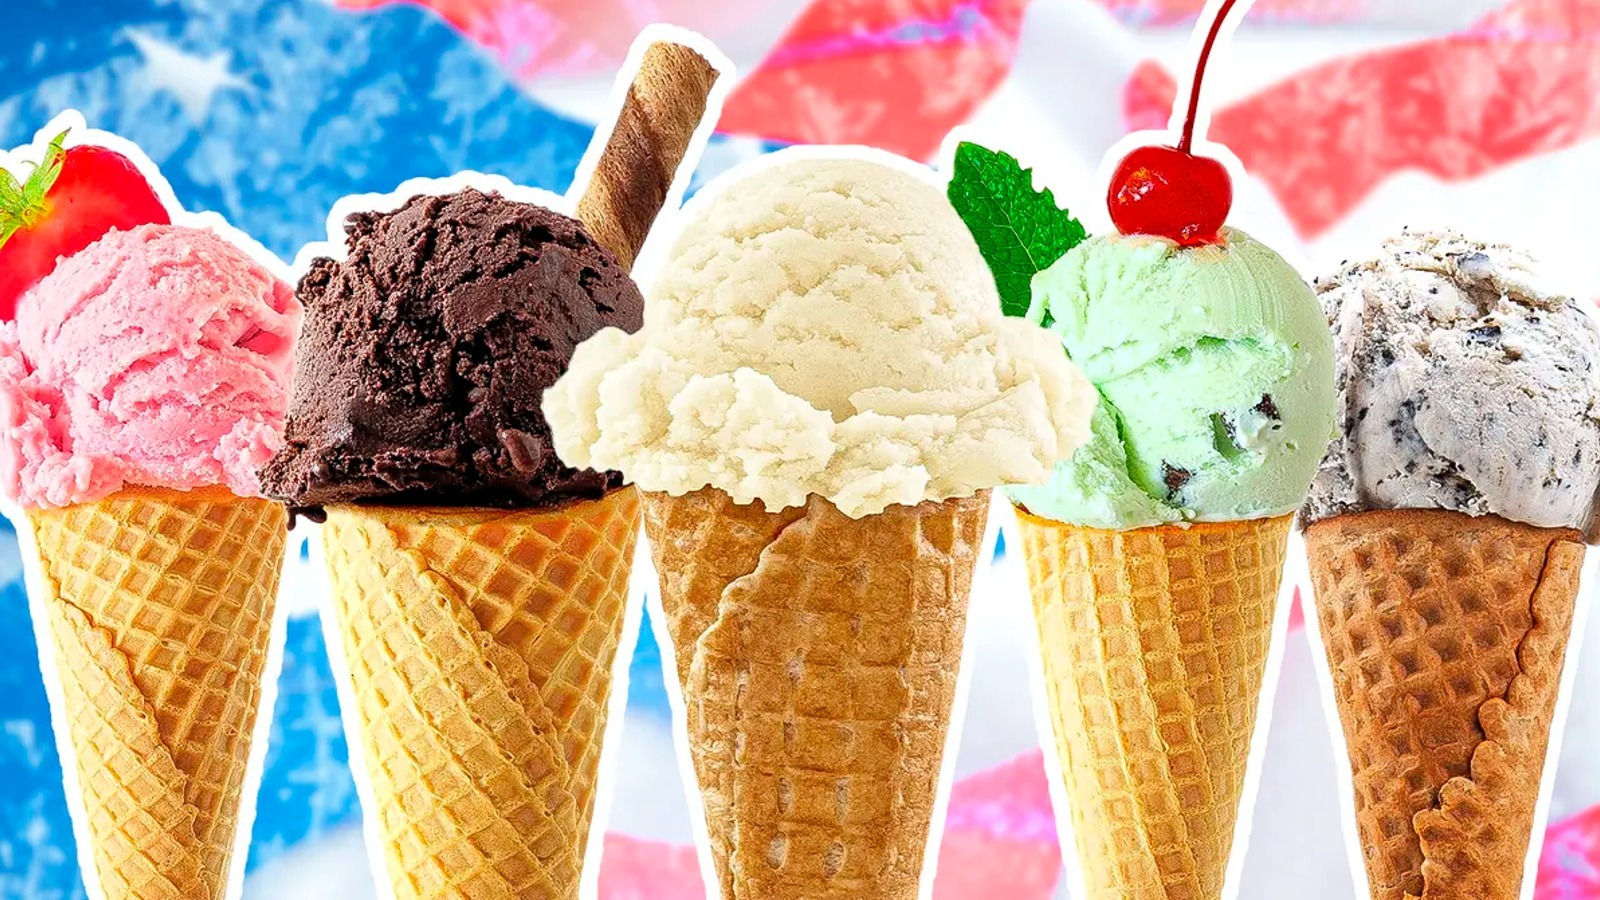 Anything but Vanilla! These 5 Homes Have Their Own Ice Cream Parlors